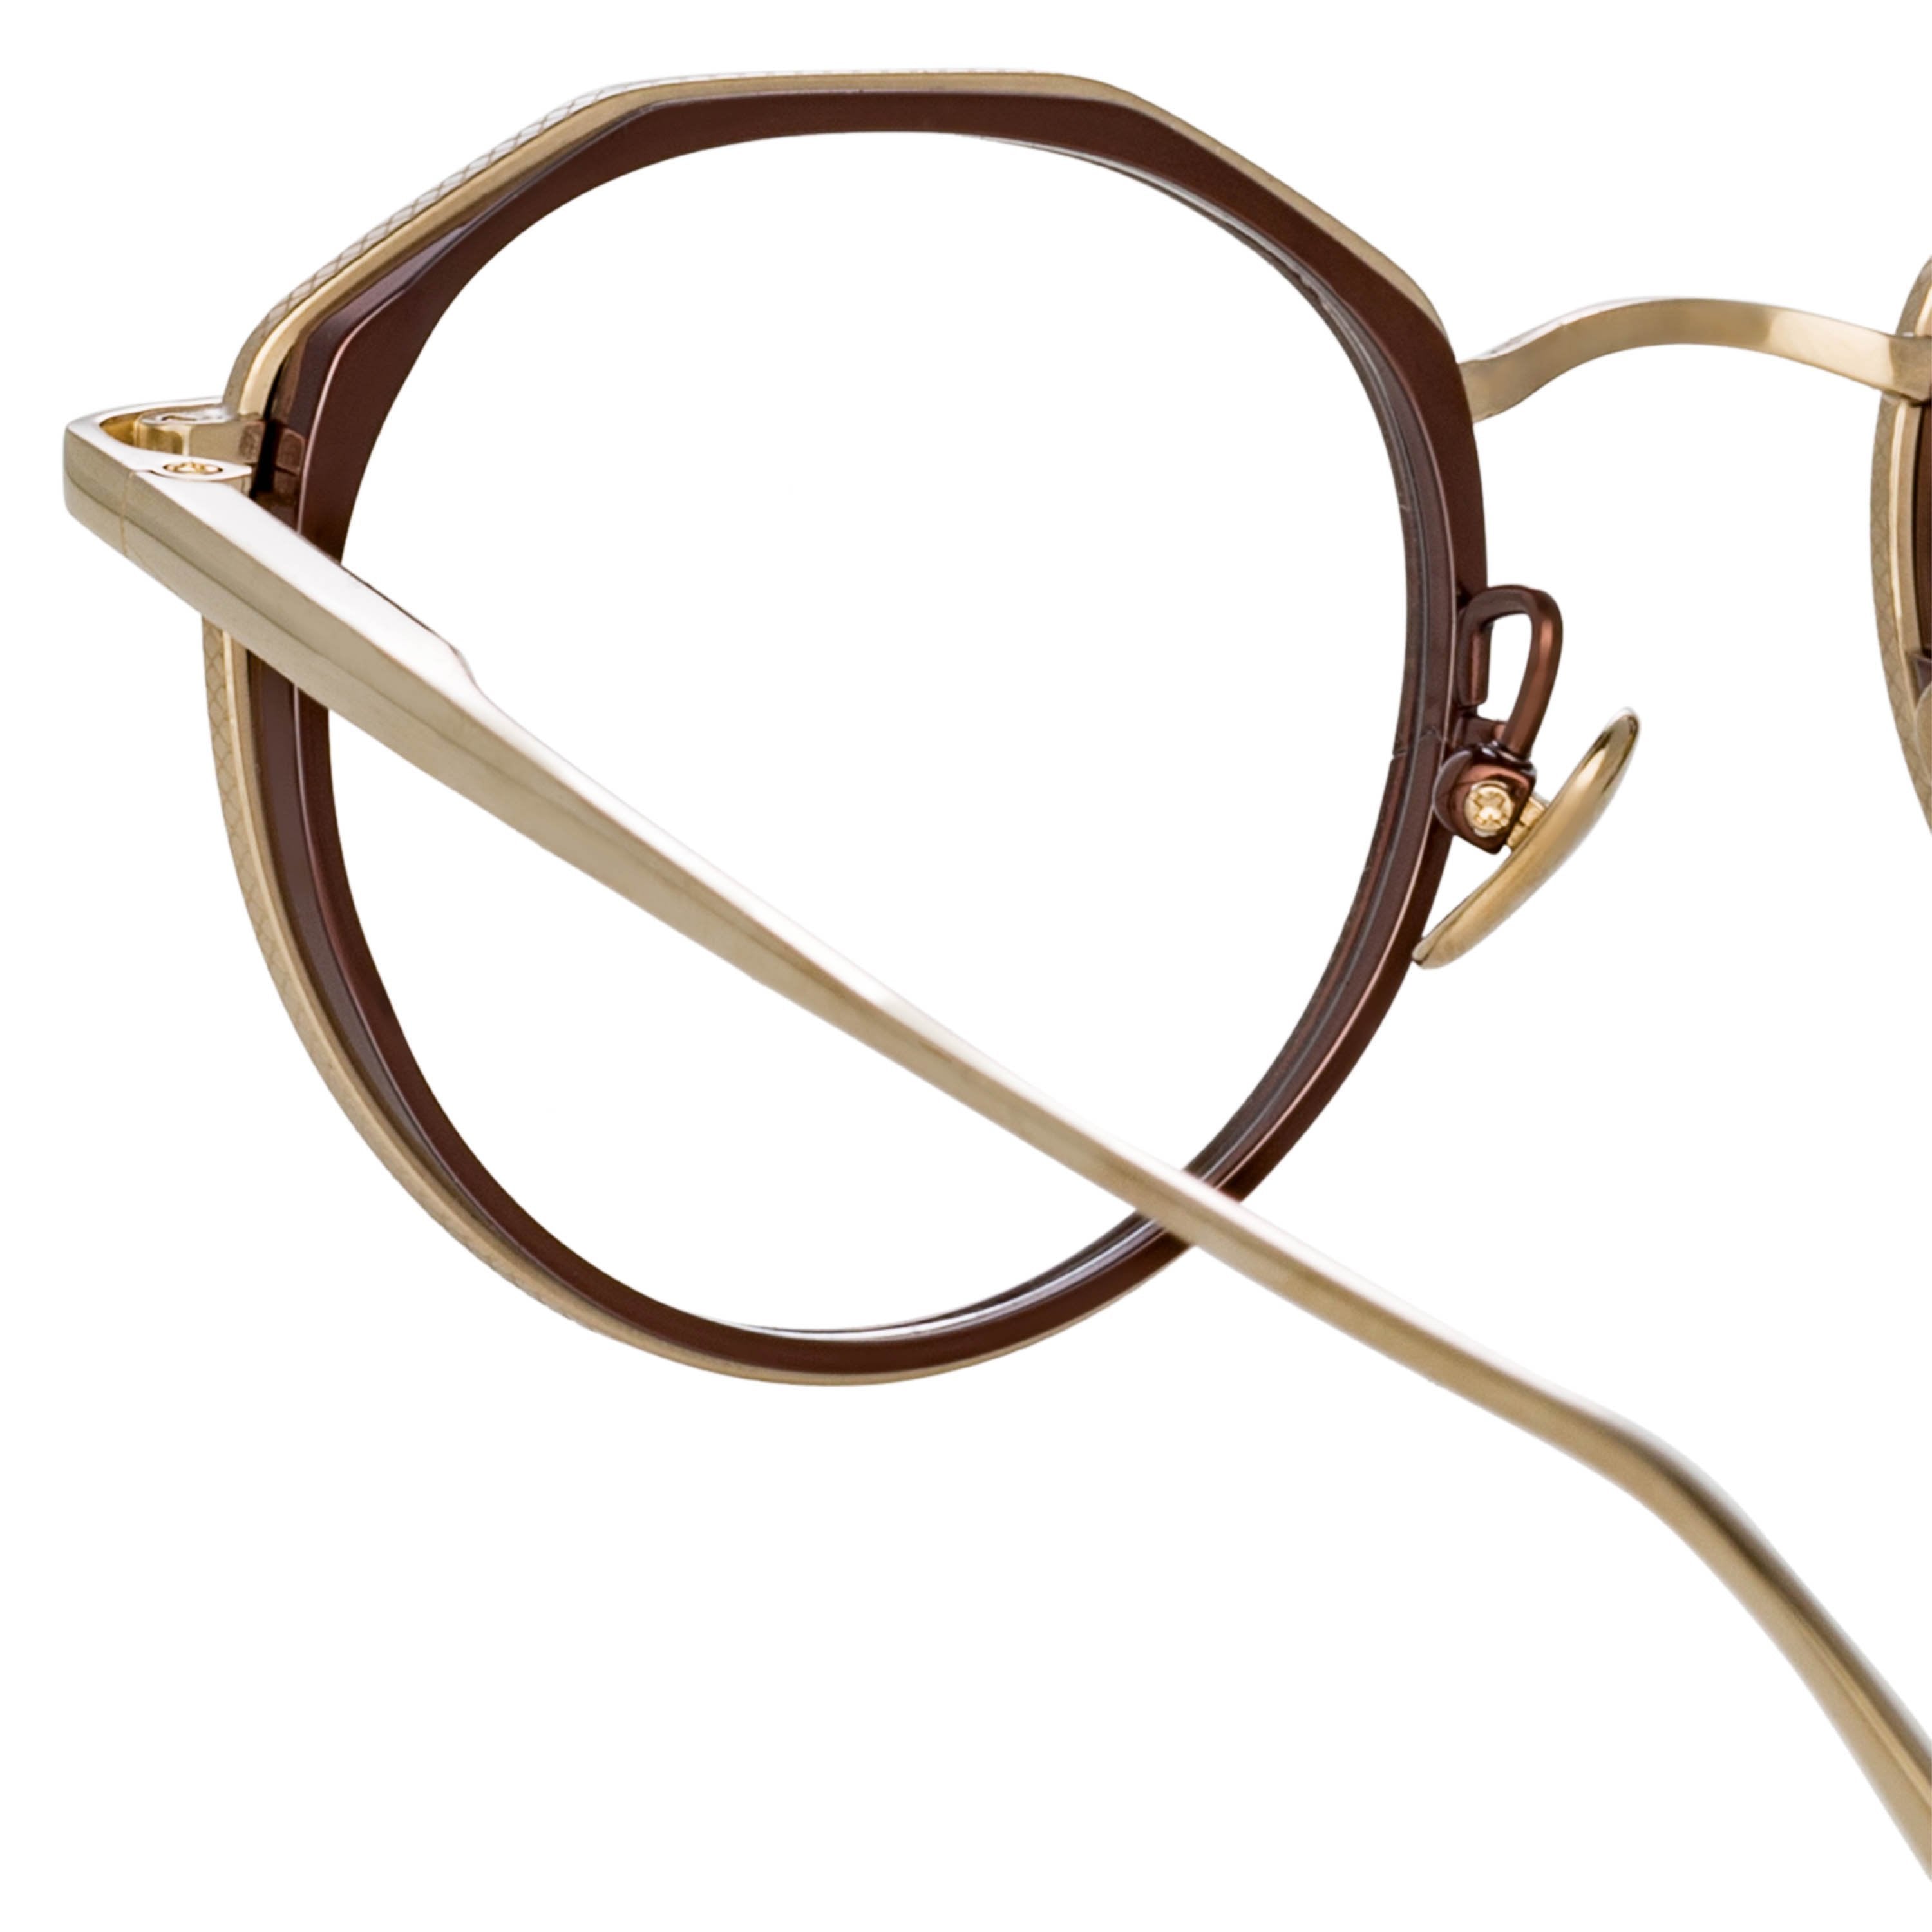 Color_LFL1225C3OPT - Cesar Angular Optical Frame in Light Gold and Brown (Men's)